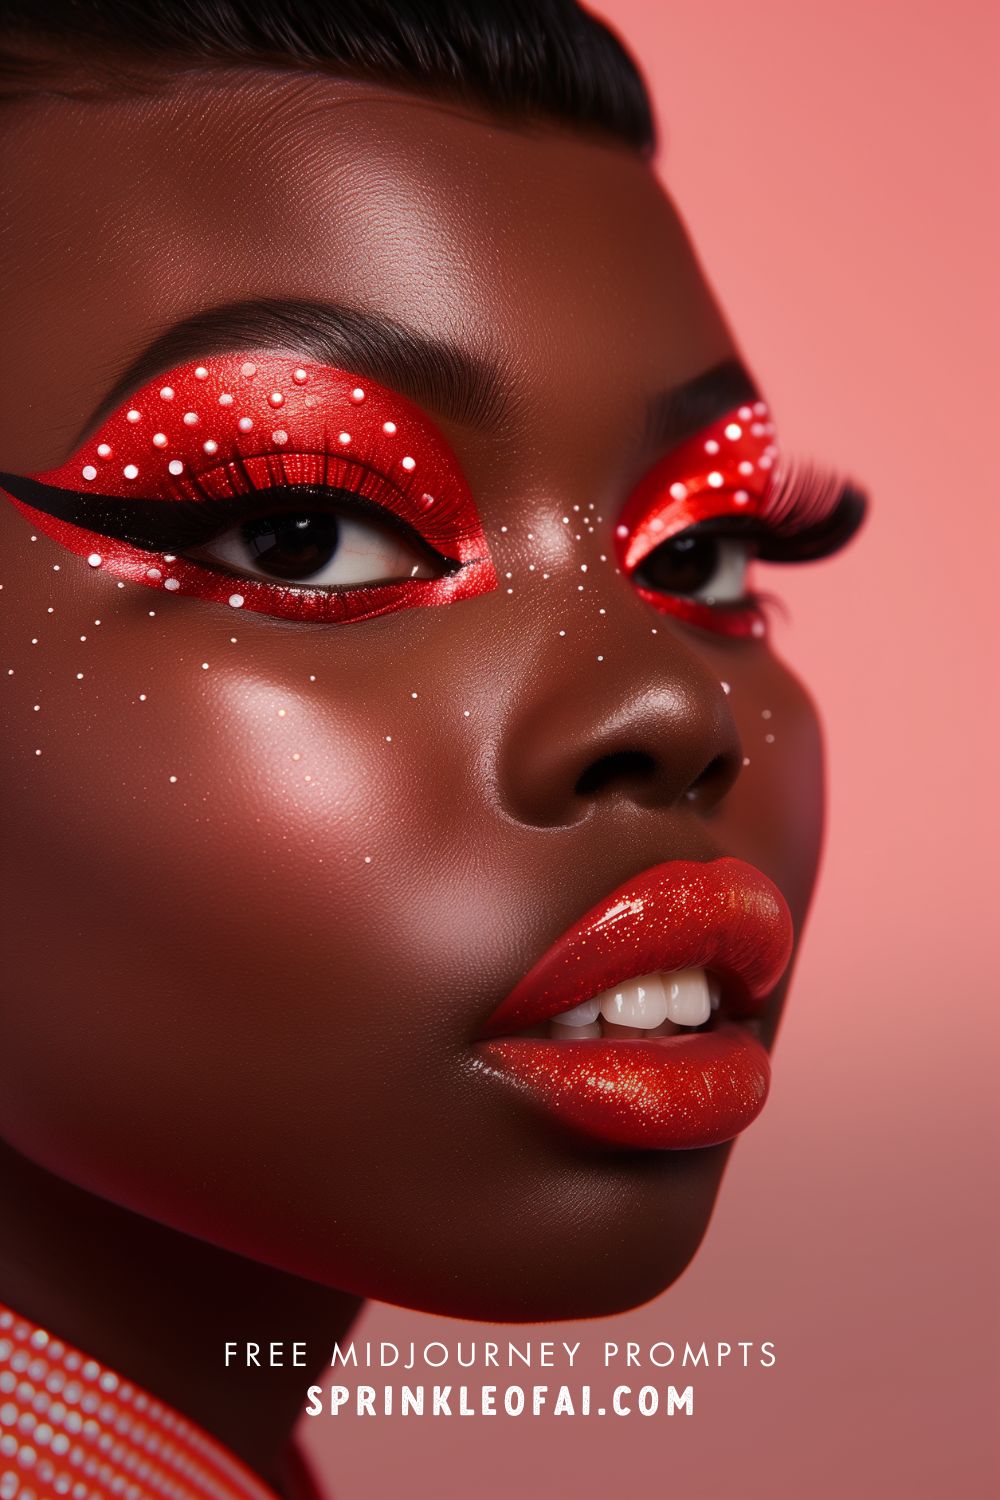 Bold & Stunning Free Midjourney Makeup Prompts - Sprinkle of AI